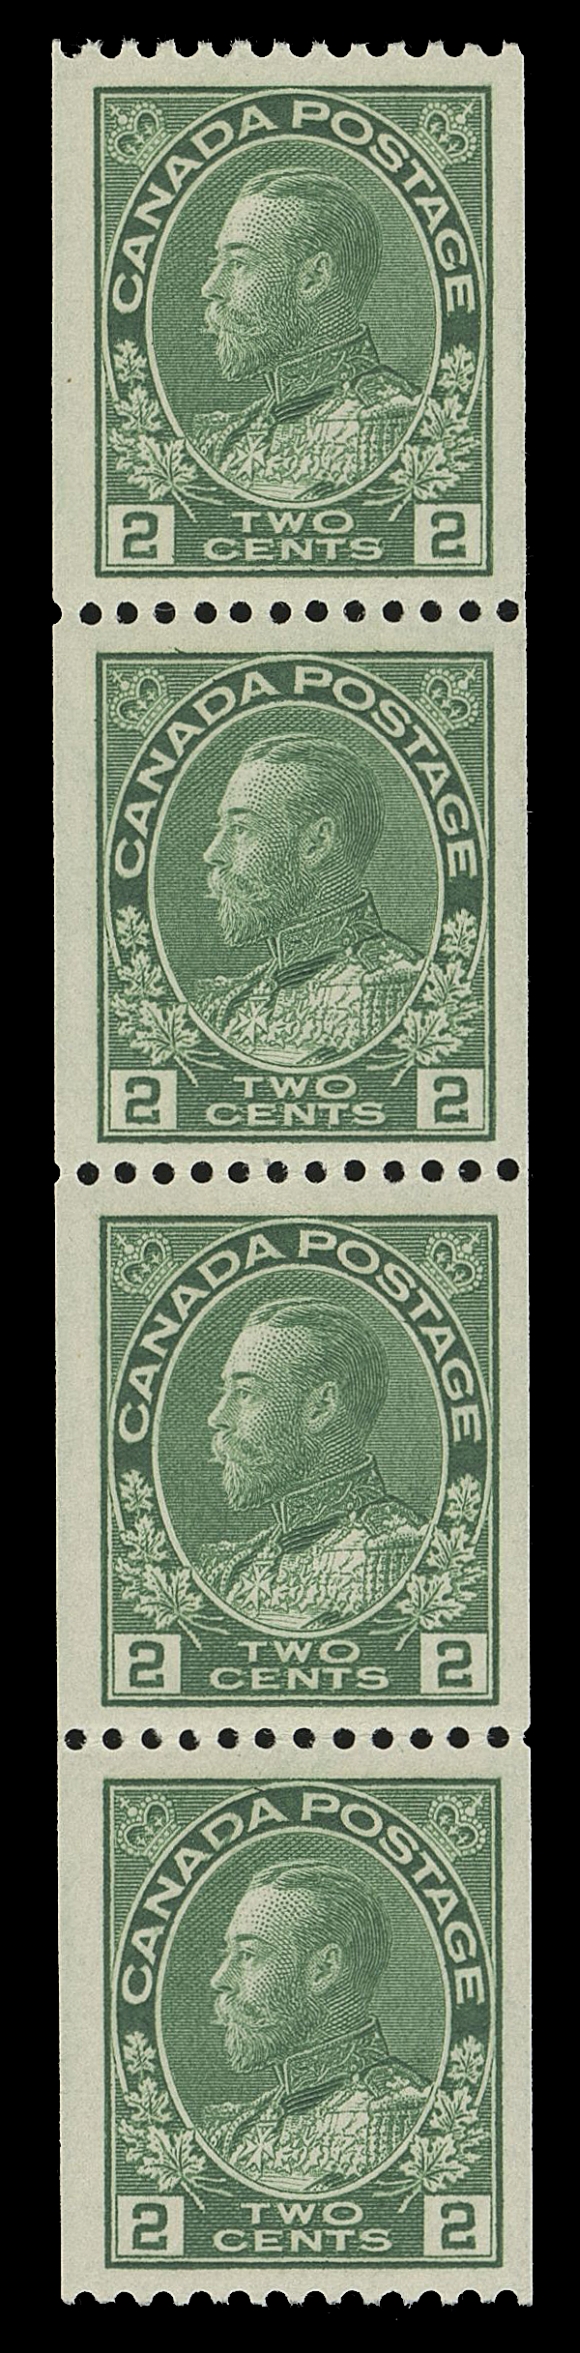 CANADA -  8 KING GEORGE V  133,An unusually select mint coil strip of four, brilliant colour and full unblemished original gum; a beautiful strip, VF NH